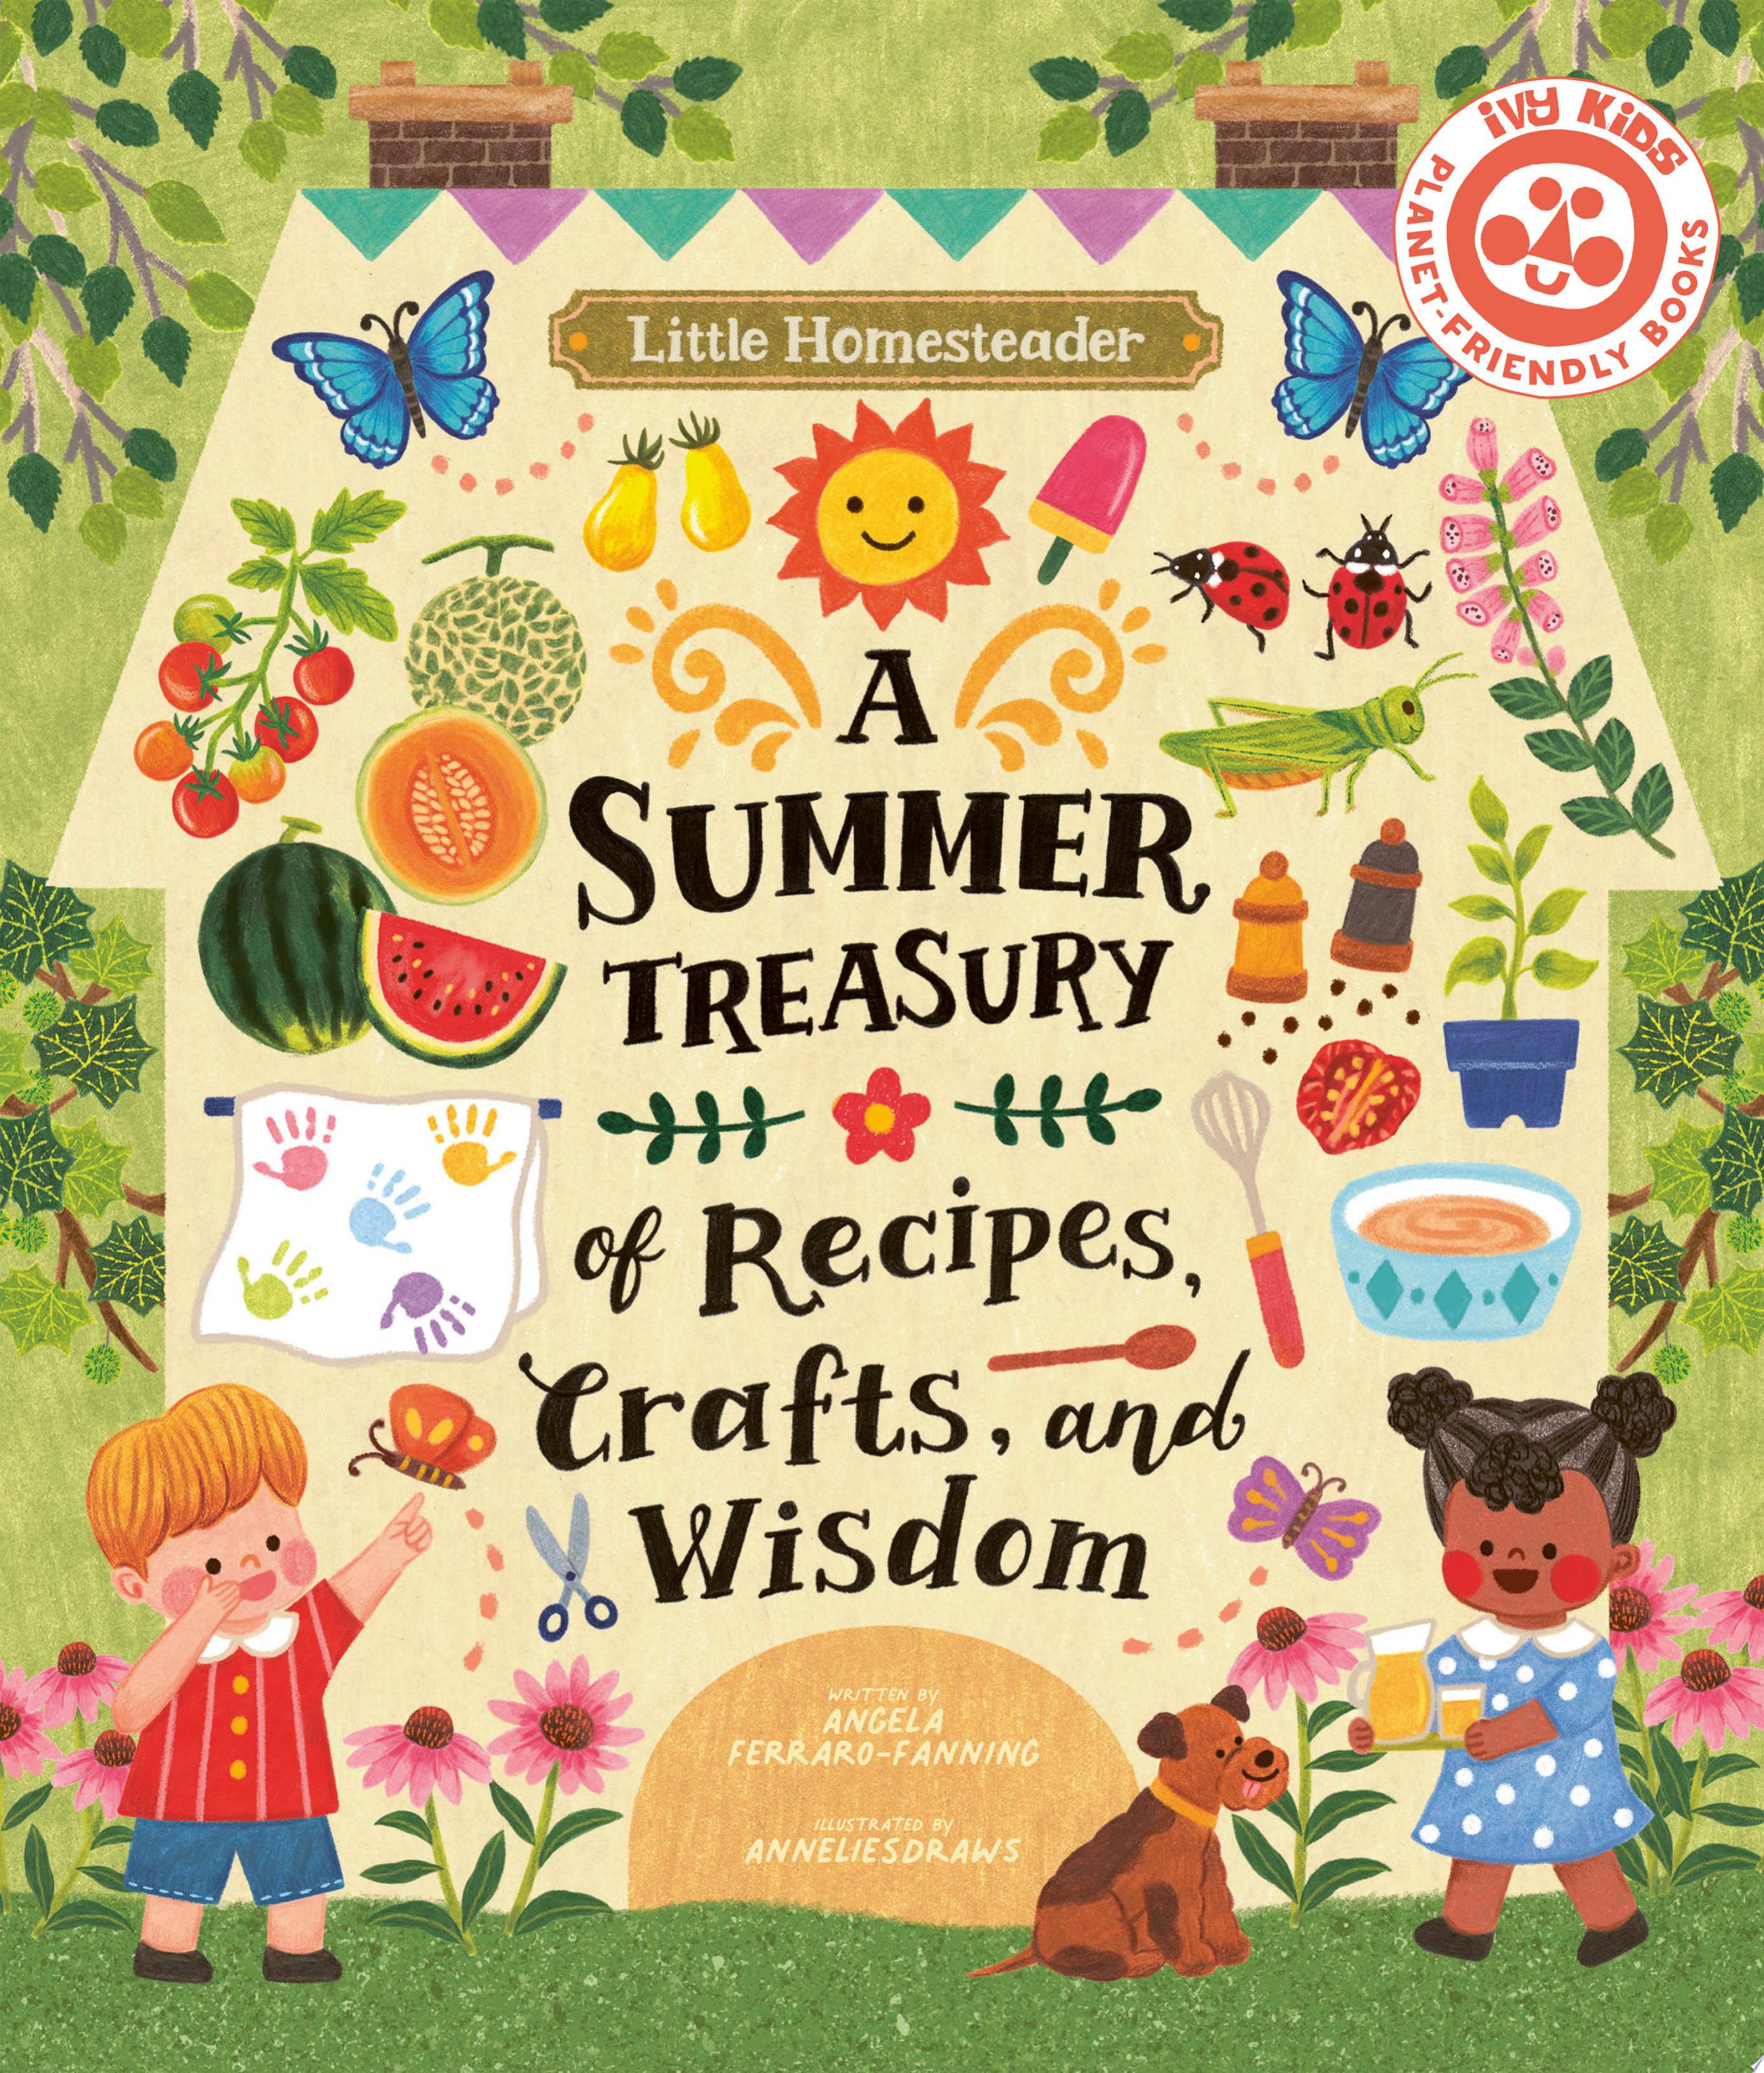 Image for "Little Homesteader: A Summer Treasury of Recipes, Crafts, and Wisdom"